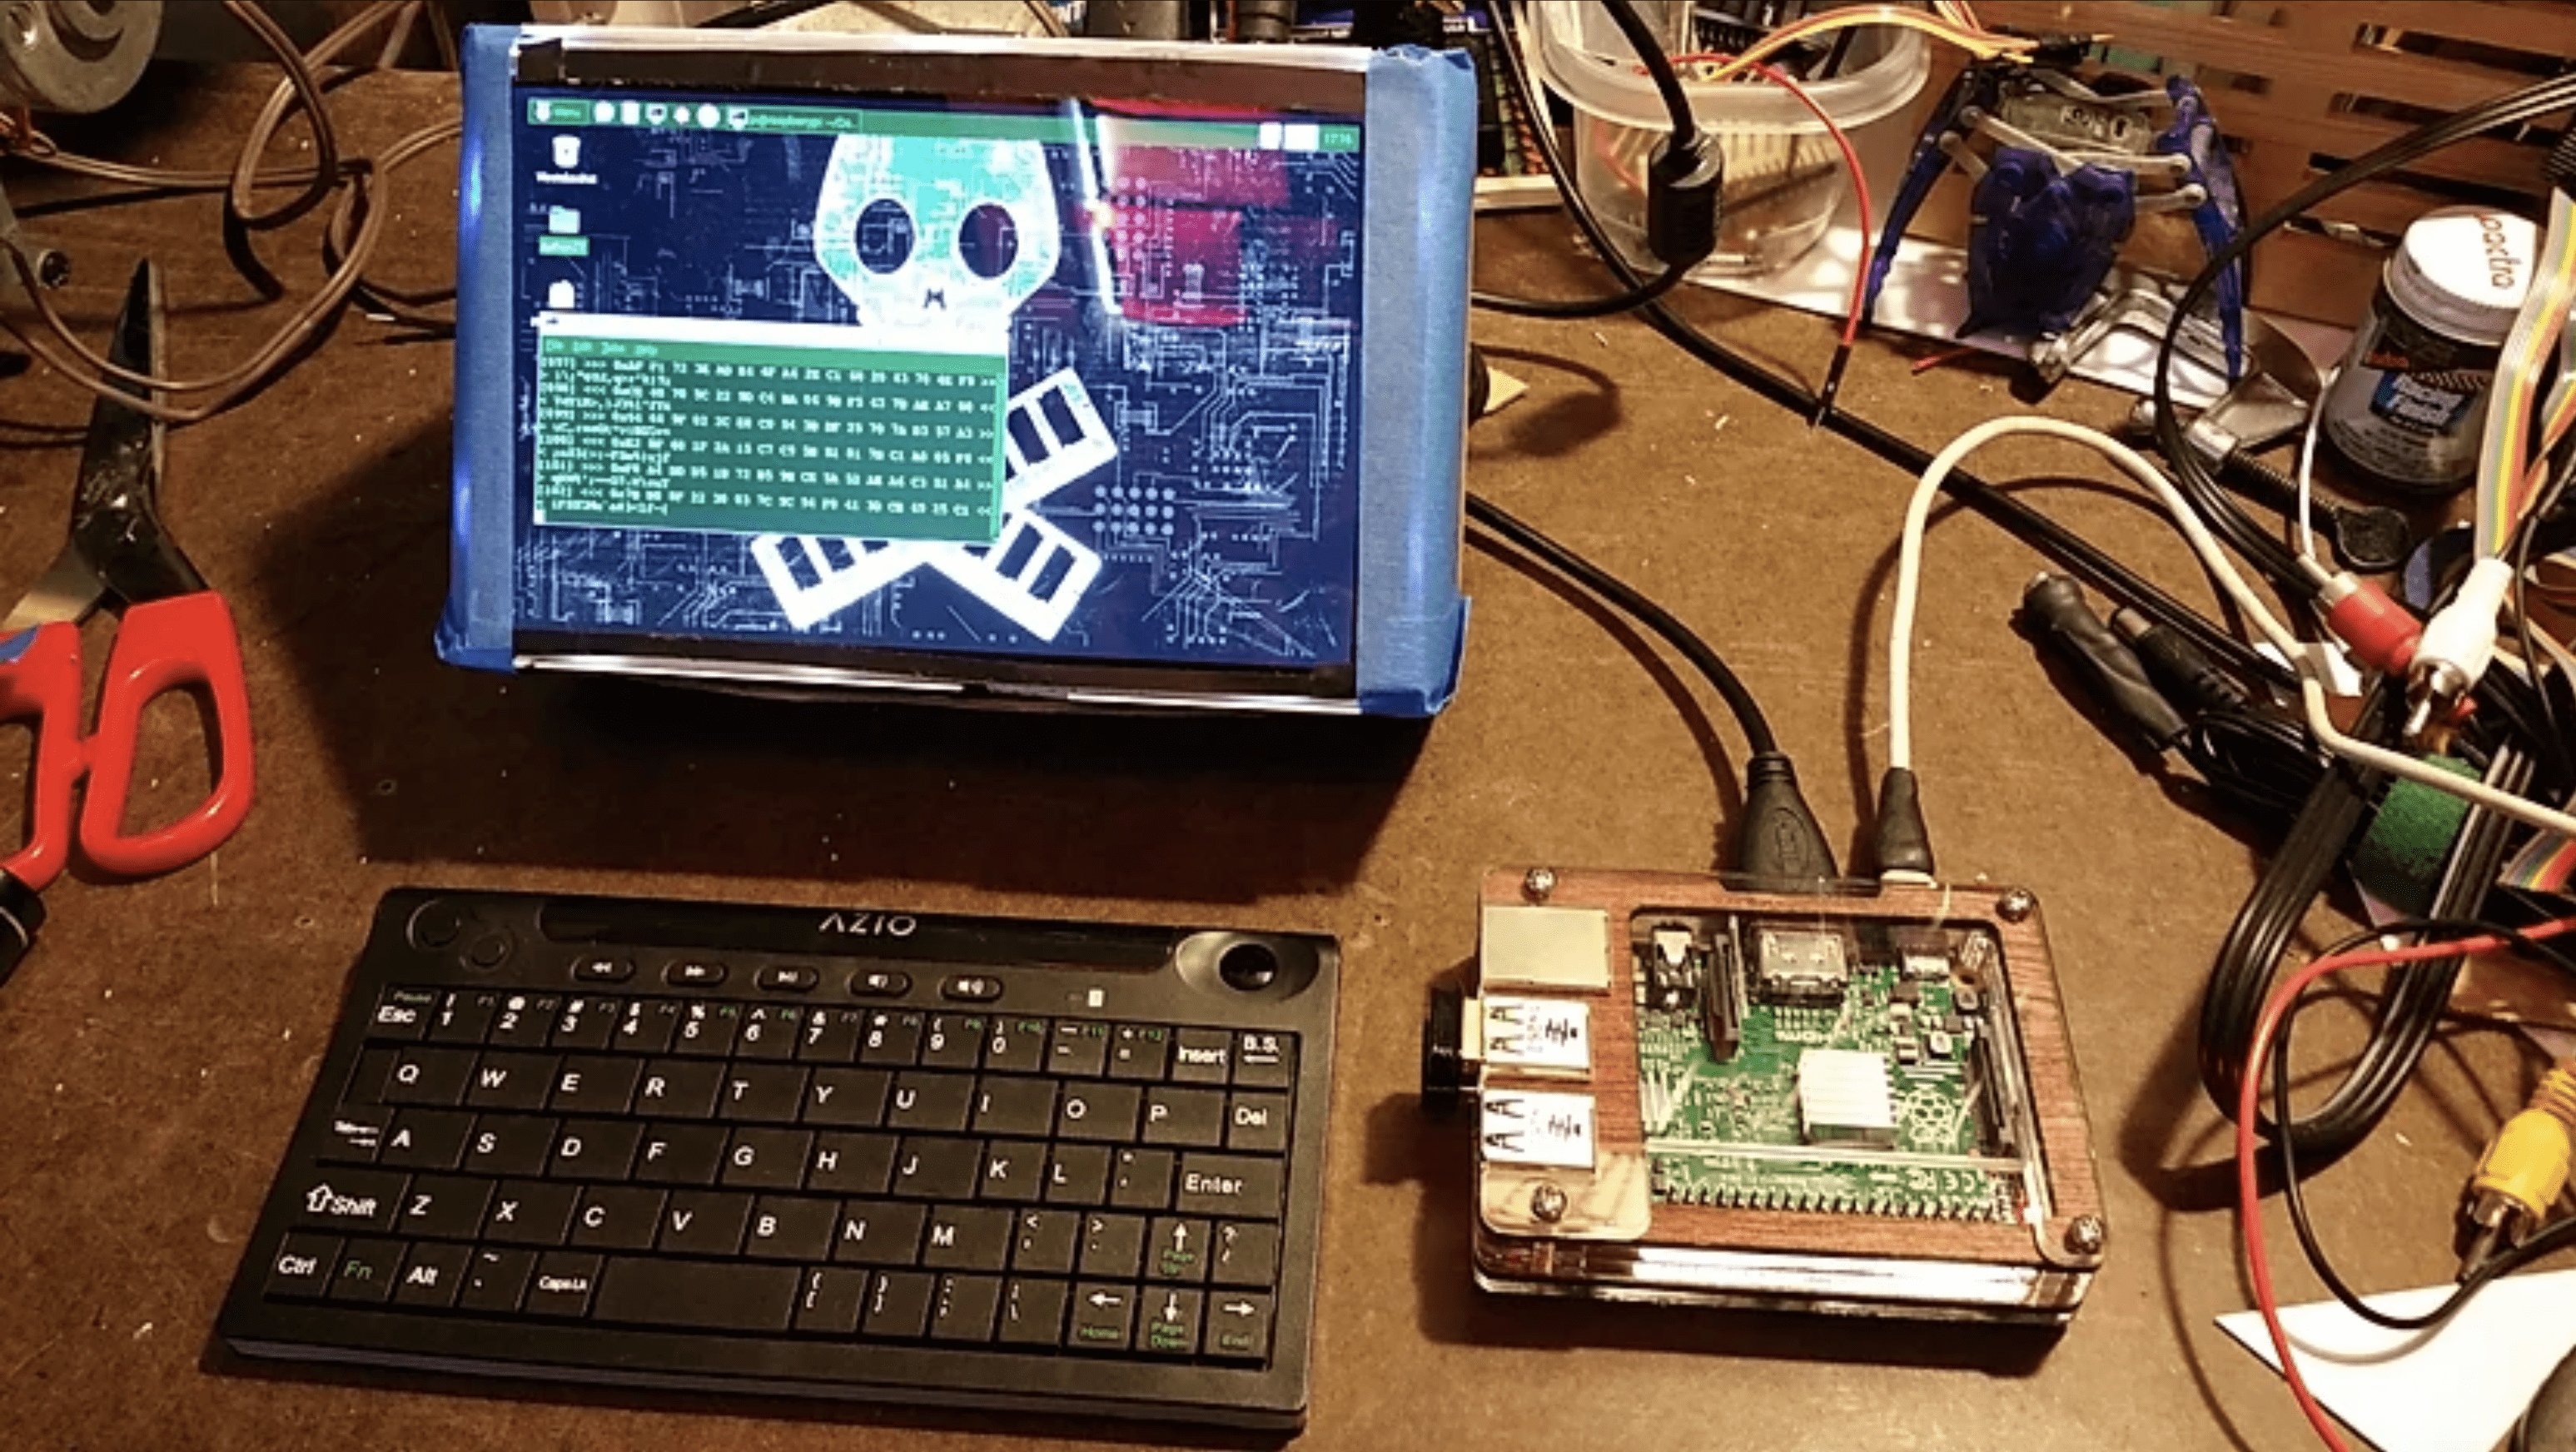 A hardware test using a Raspberry Pi. My later cyberdeck designs have used this platform.